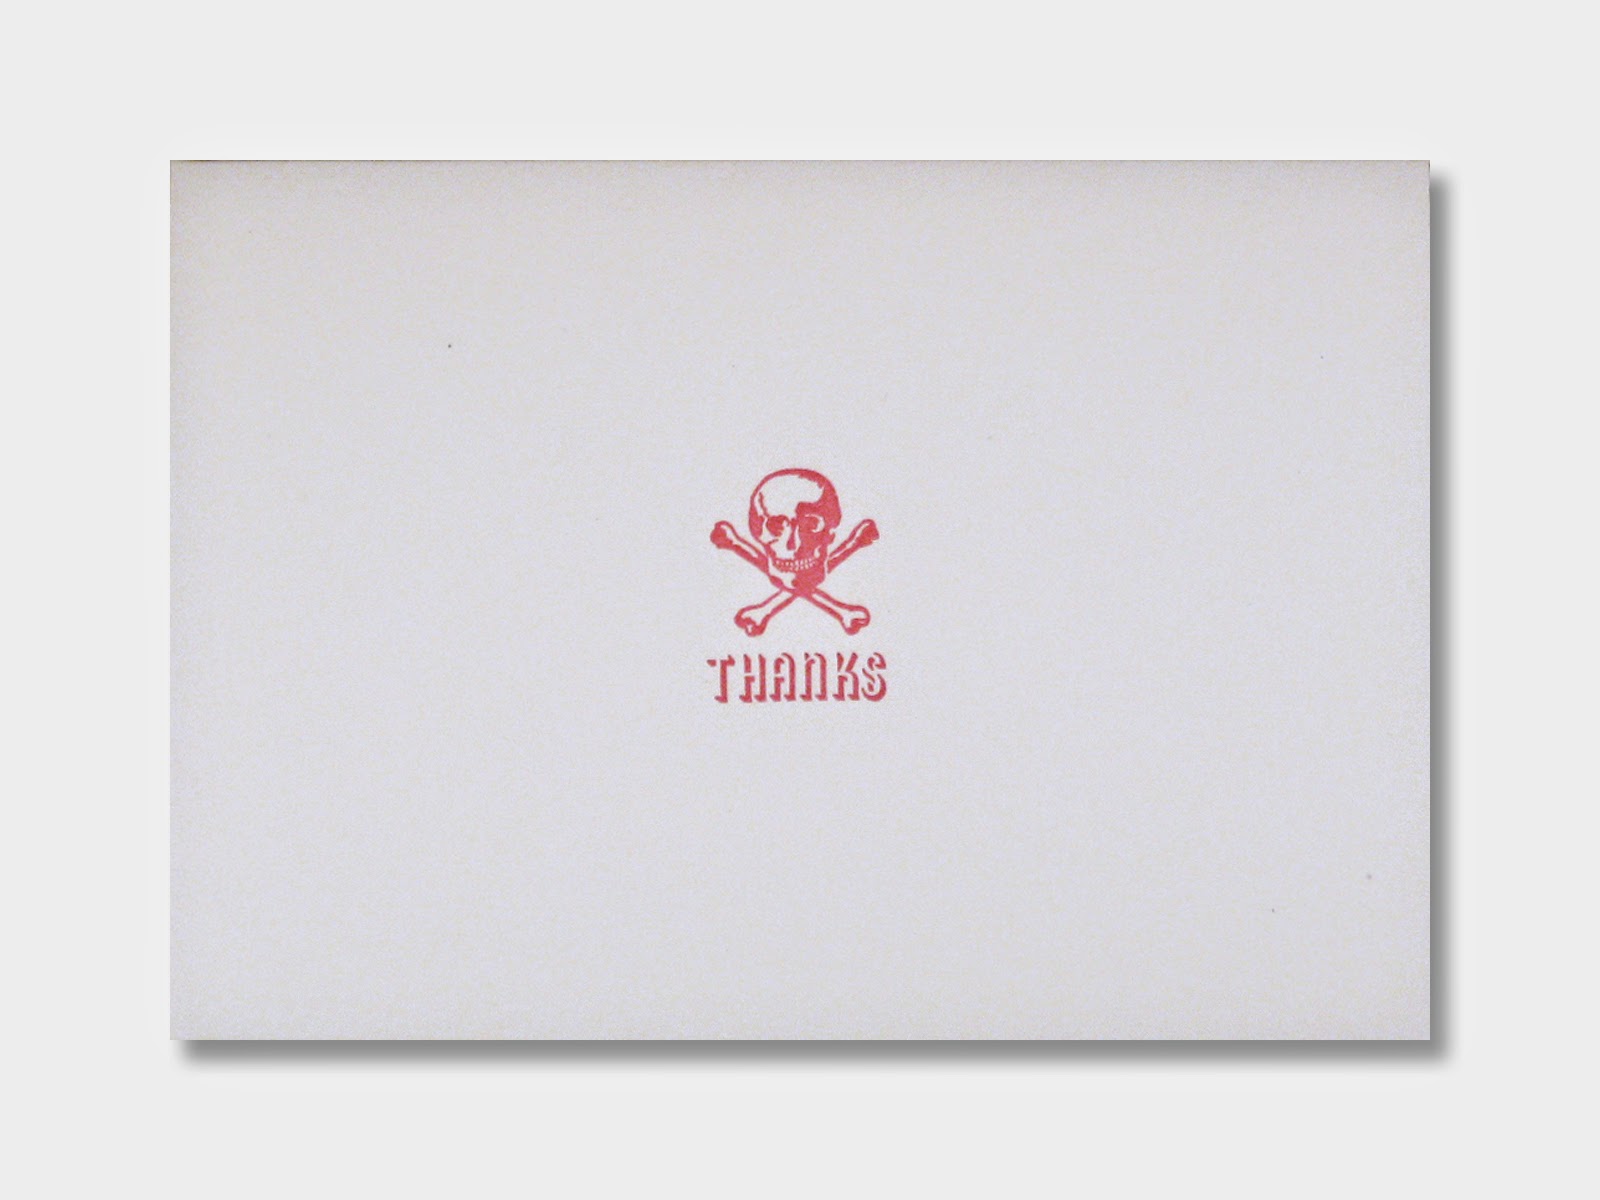 https://inviting.myshopify.com/collections/stationery/products/skull-thanks